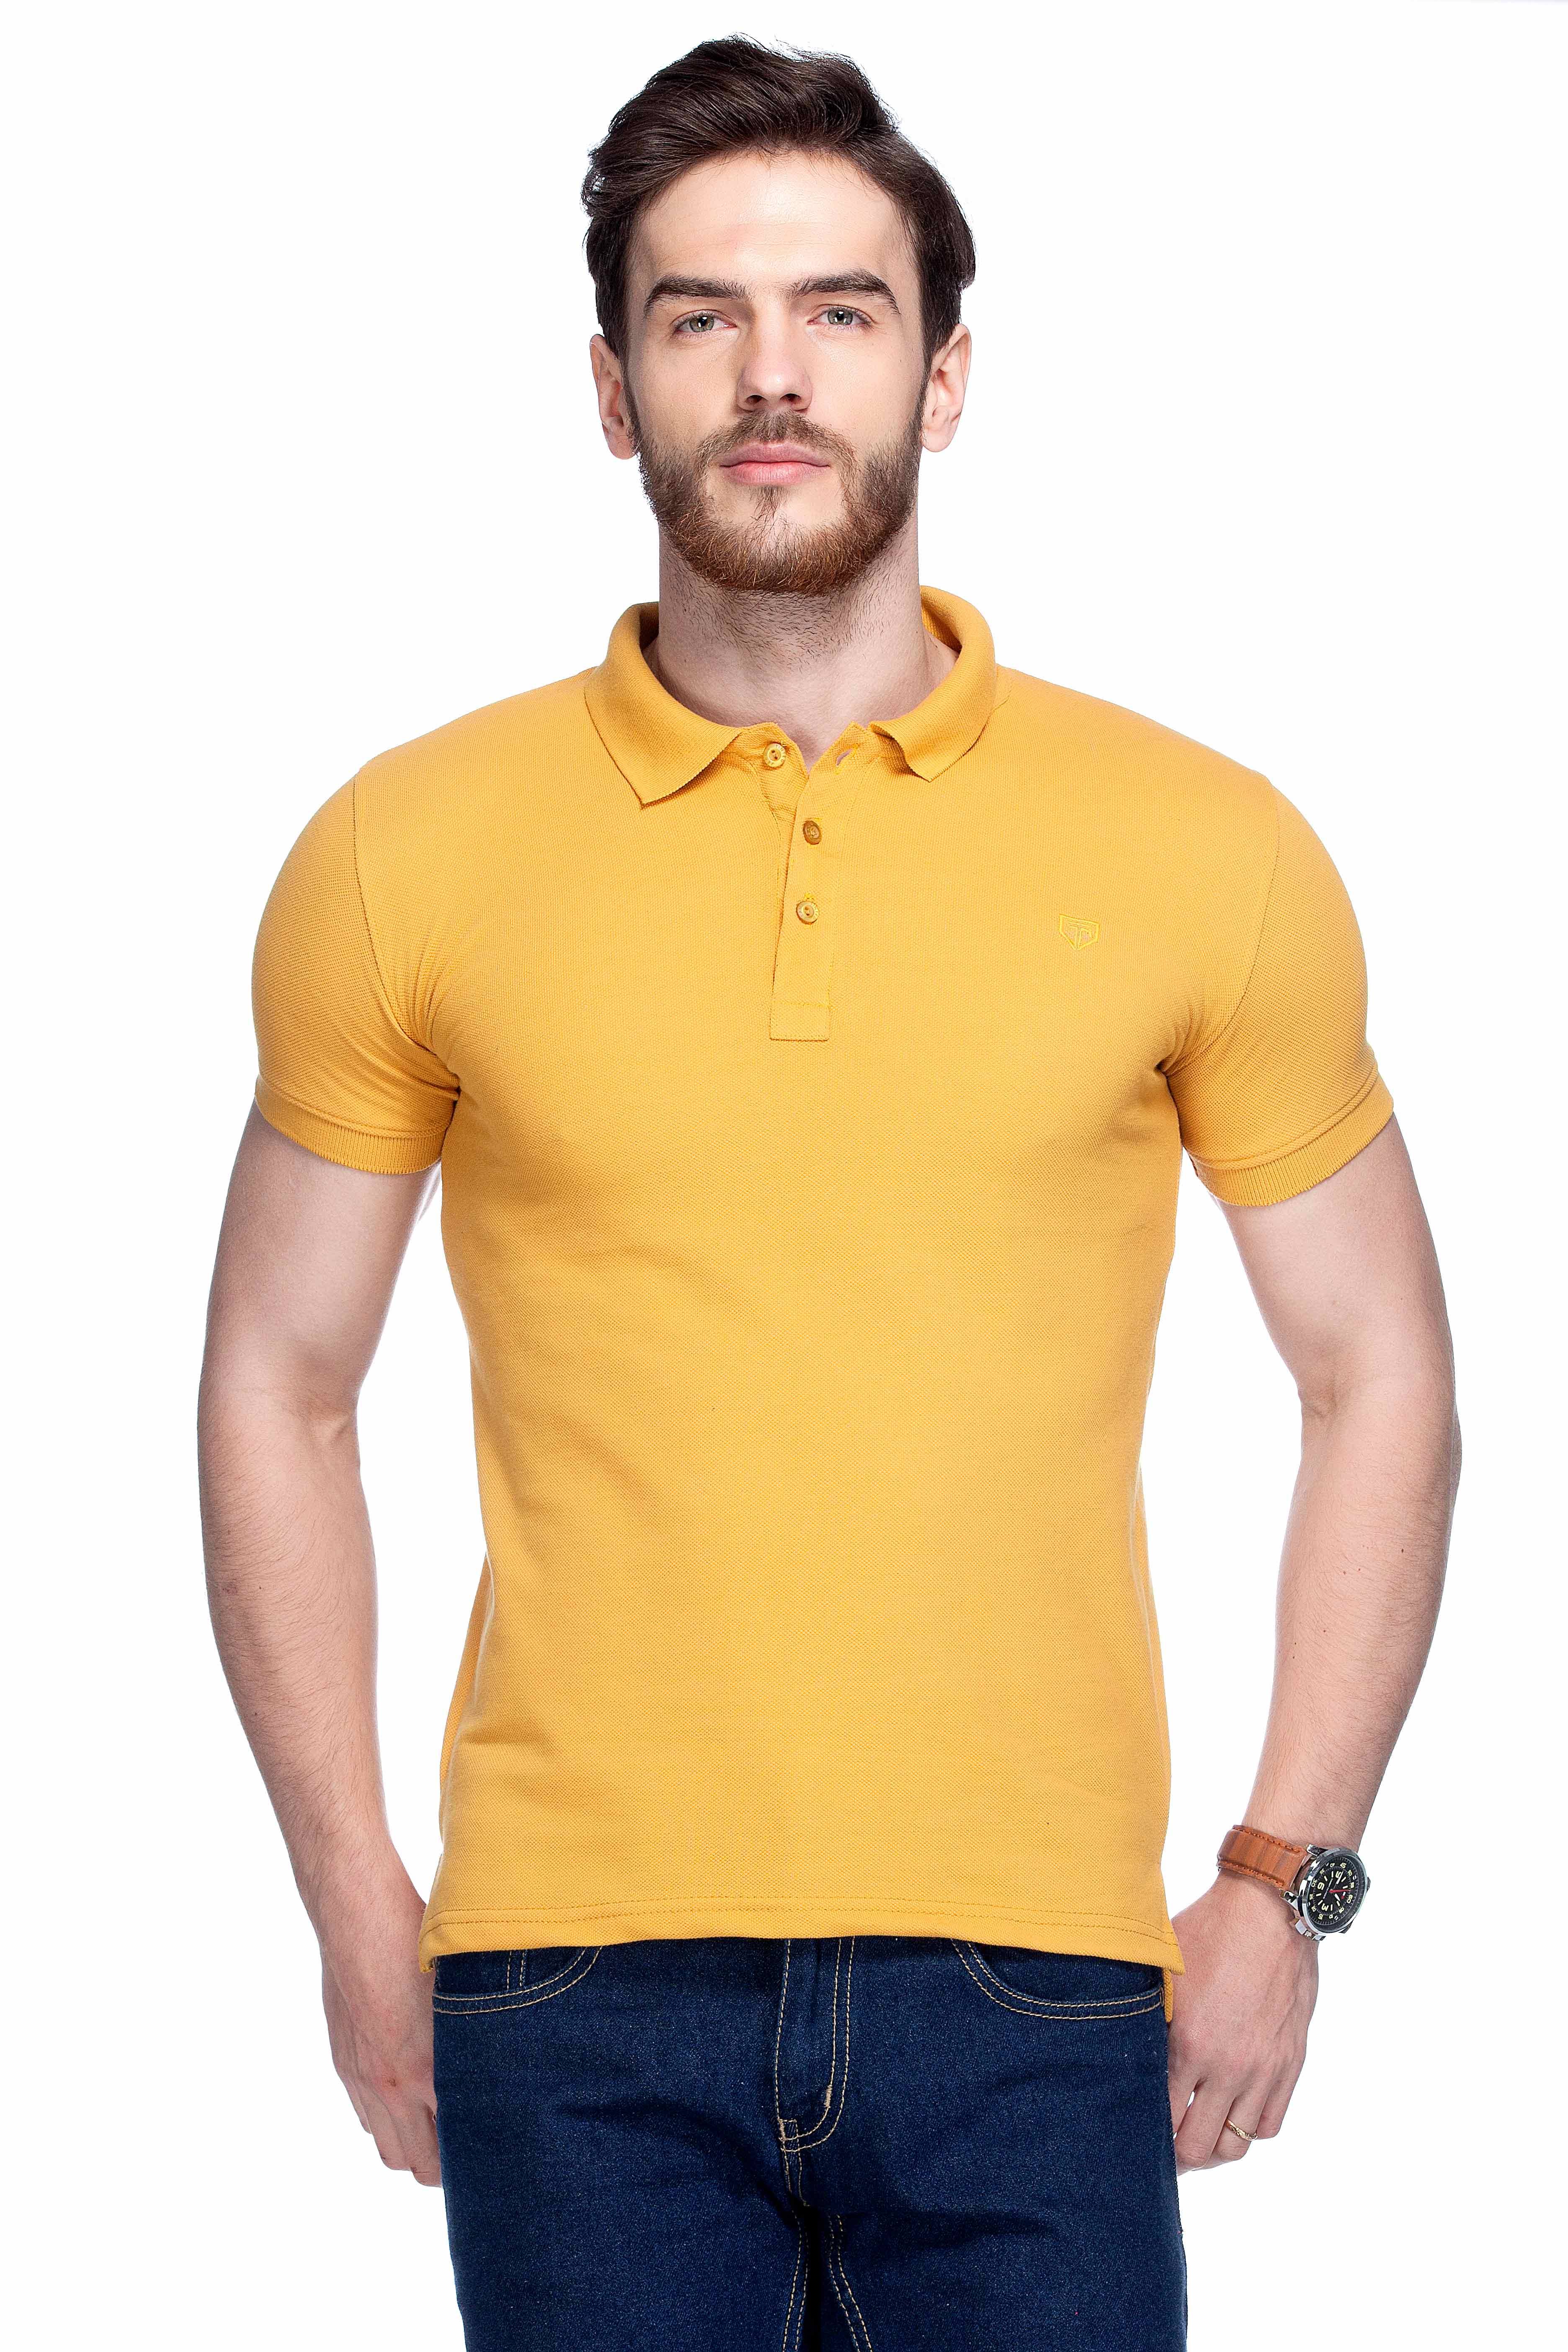 Buy Tinted Mustard Polo Neck Others T-Shirt For Men Online @ ₹556 from ...